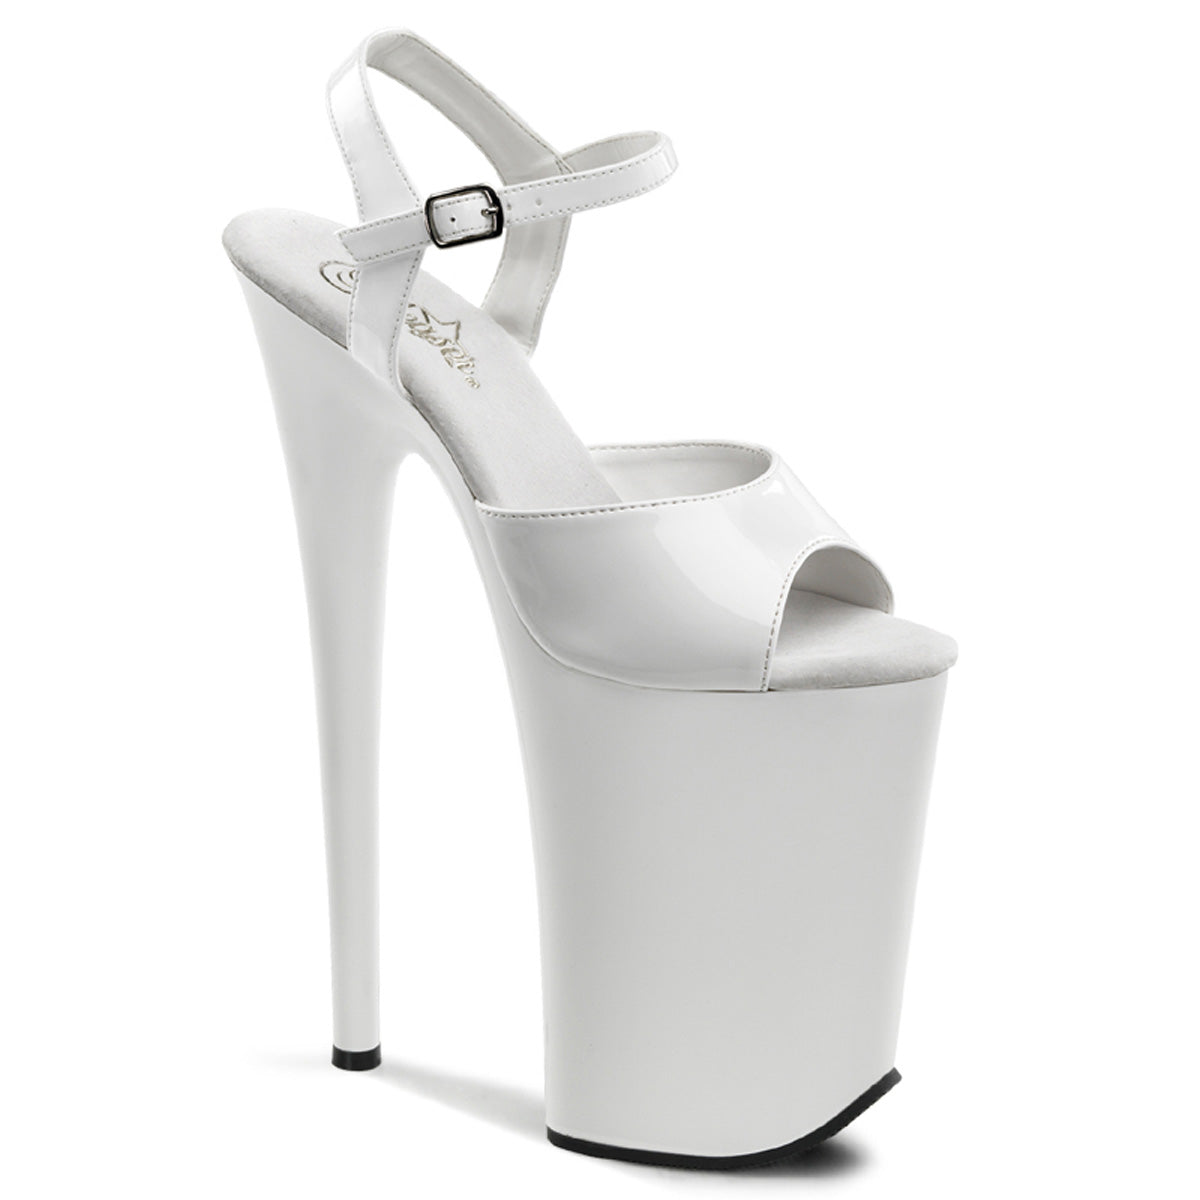 INFINITY-909 Pleaser 9" Heel White Pole Dancing Platforms-Pleaser- Sexy Shoes